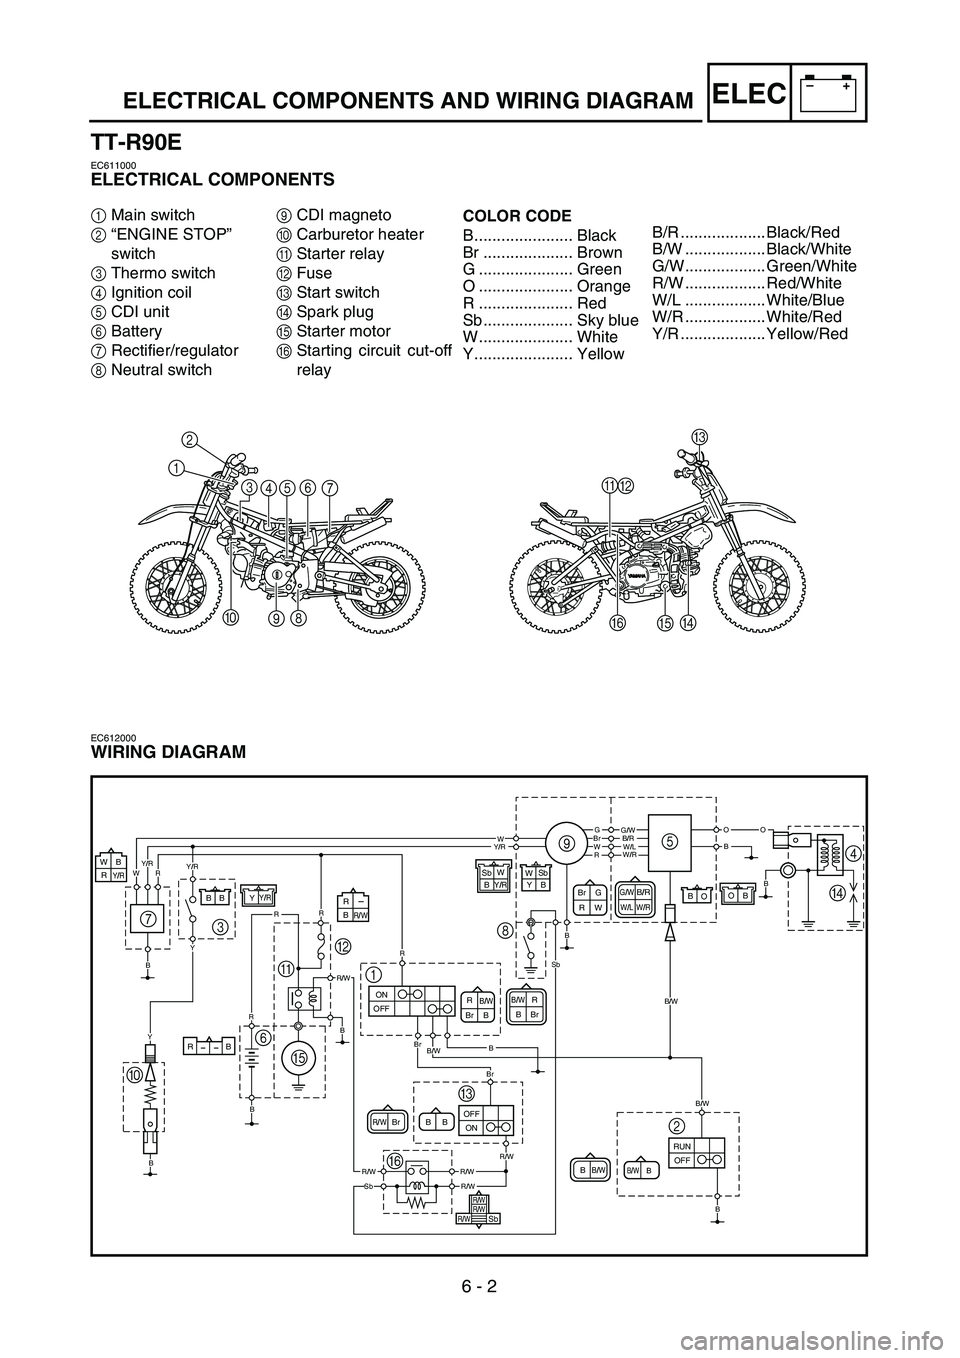 YAMAHA TTR90 2005  Owners Manual 6 - 2
–+ELEC
12
3
456
7
0
98
A
B
F
EC
D
ELECTRICAL COMPONENTS AND WIRING DIAGRAM
TT-R90E
EC611000
ELECTRICAL COMPONENTS
1Main switch
2“ENGINE STOP” 
switch
3Thermo switch
4Ignition coil
5CDI uni